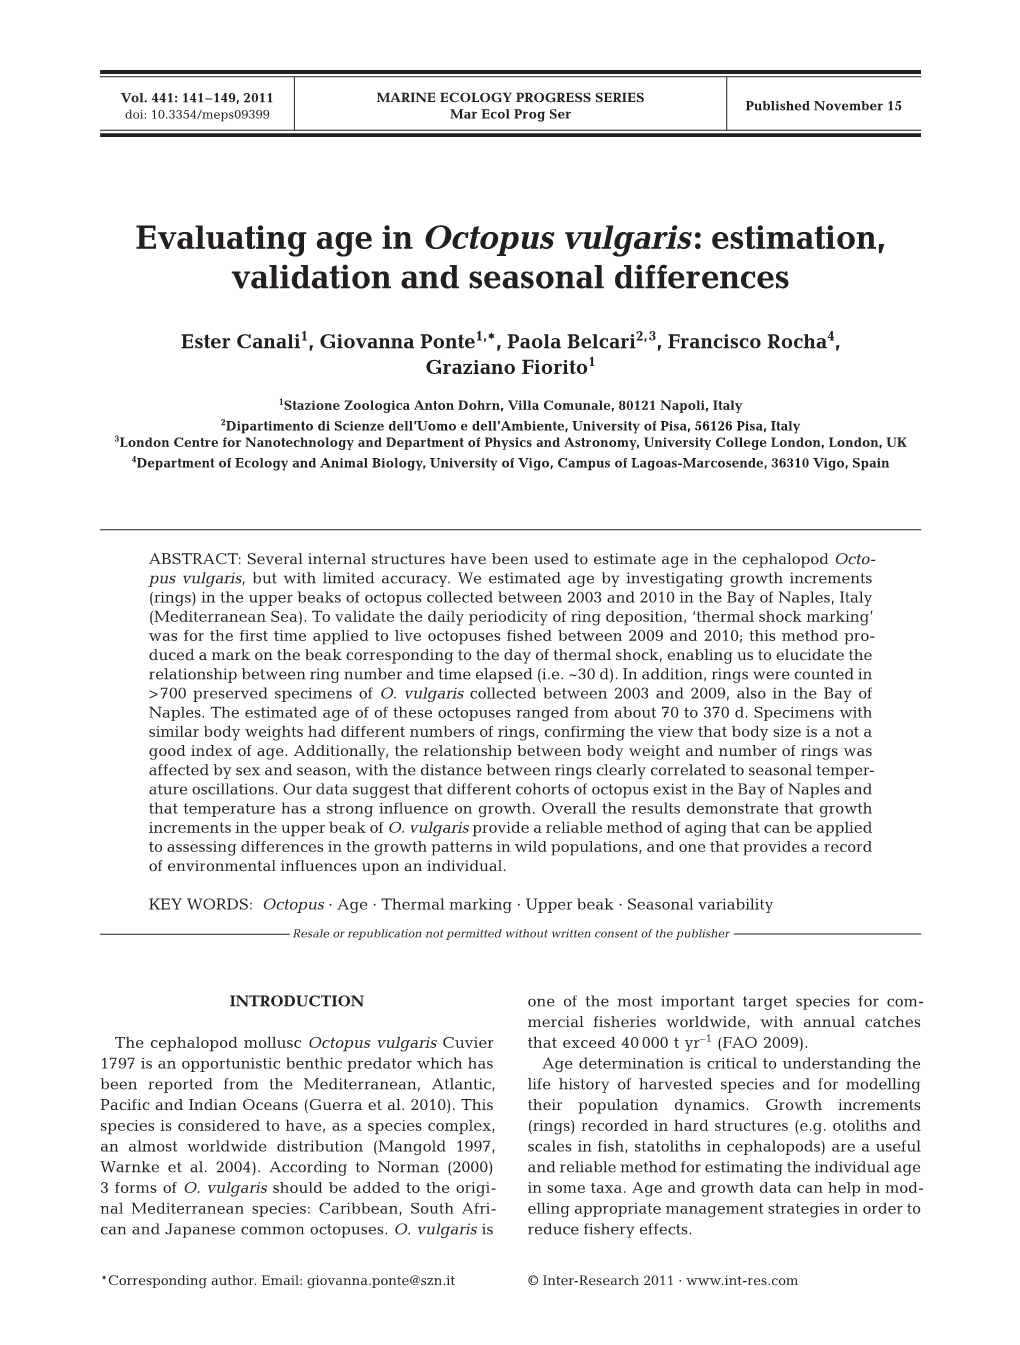 Evaluating Age in Octopus Vulgaris: Estimation, Validation and Seasonal Differences